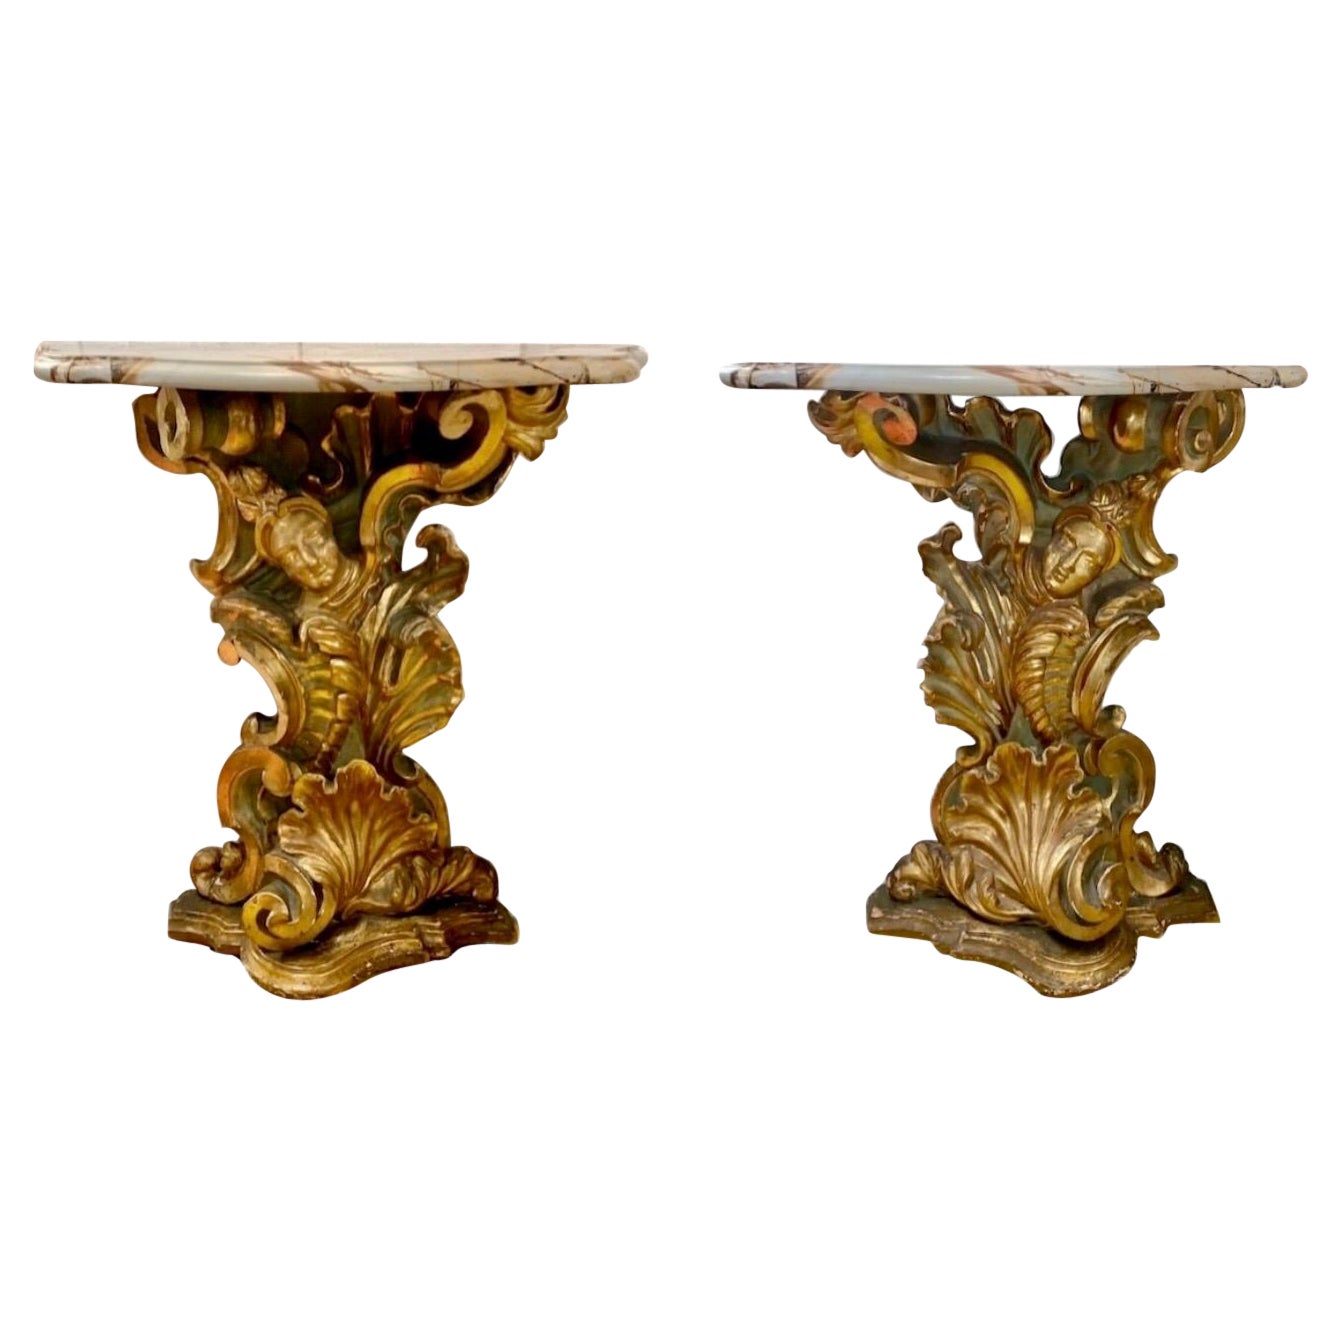 Pair of 18th Century Italian Painted & Gilt Carved Wood Consoles